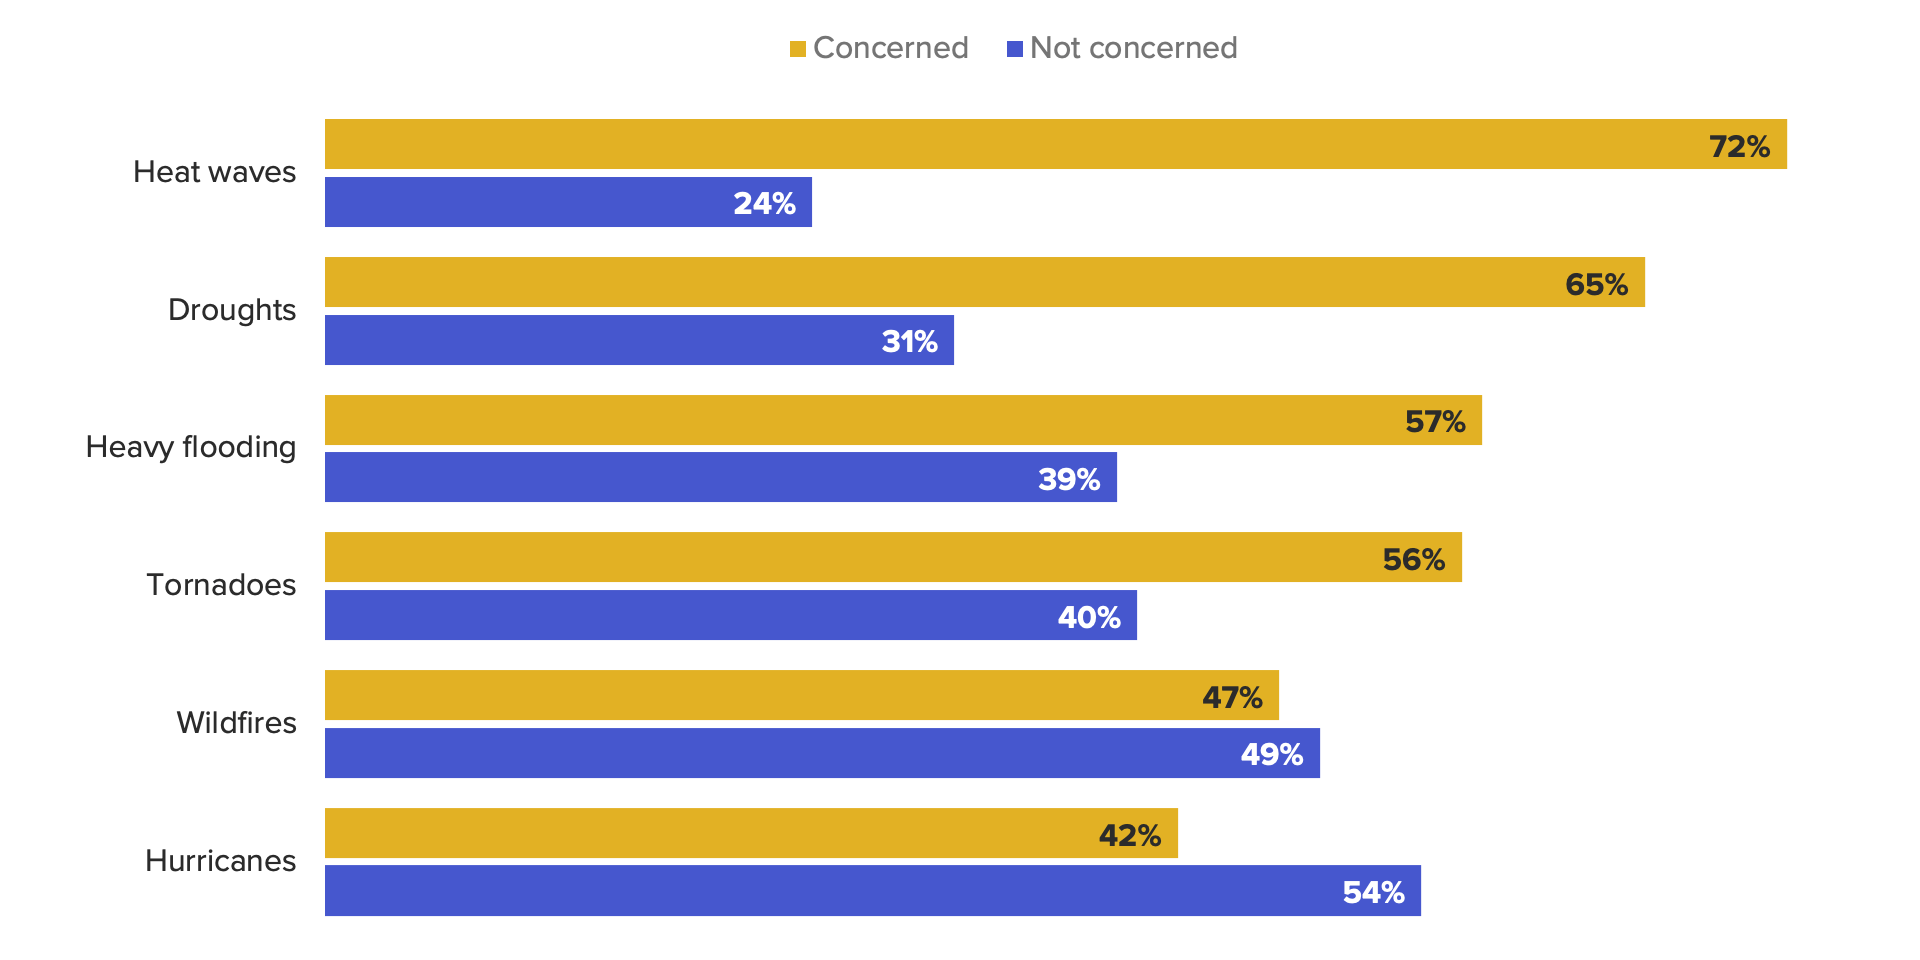 Nearly 3 in 4 Adults Are Concerned About Heat Waves in Their Communities